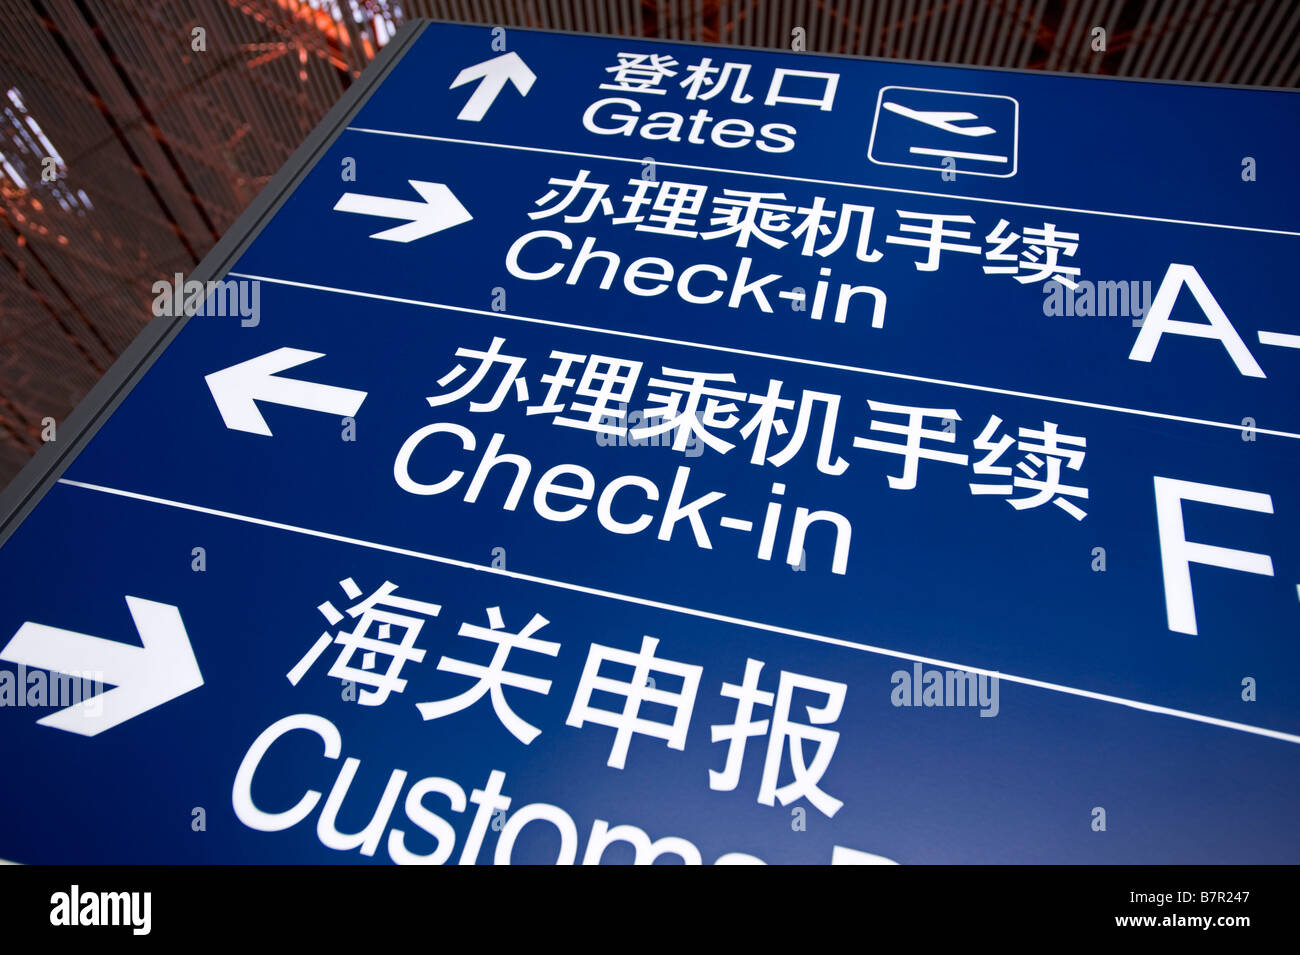 Airport information direction sign in China showing location to departure gates and check in 2009 Stock Photo